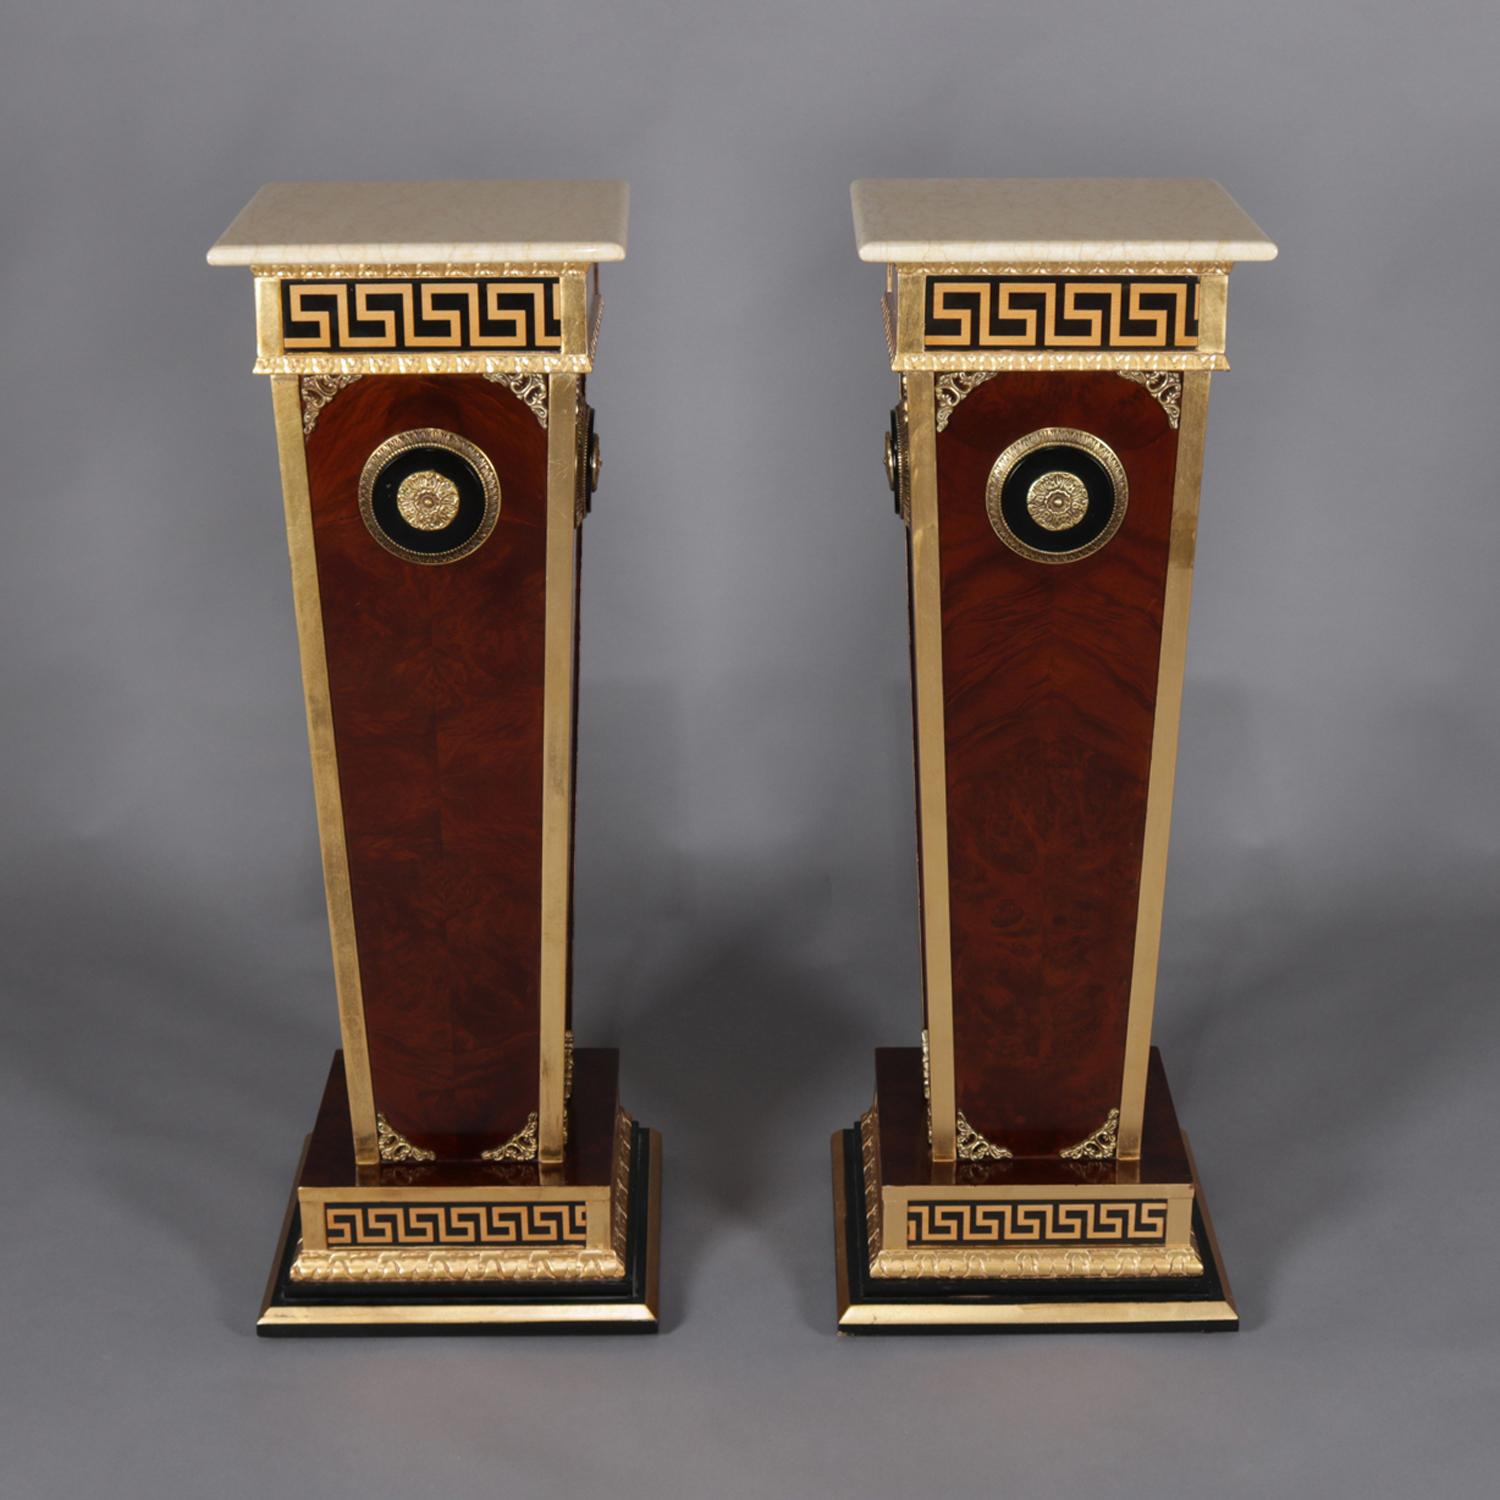 A pair of matching neoclassical sculpture display pedestals feature flame mahogany with gilt Greek Key banding, cast ormolu mounts including central medallions, and supporting cast faux marble resin display, 20th century

Measures: 39